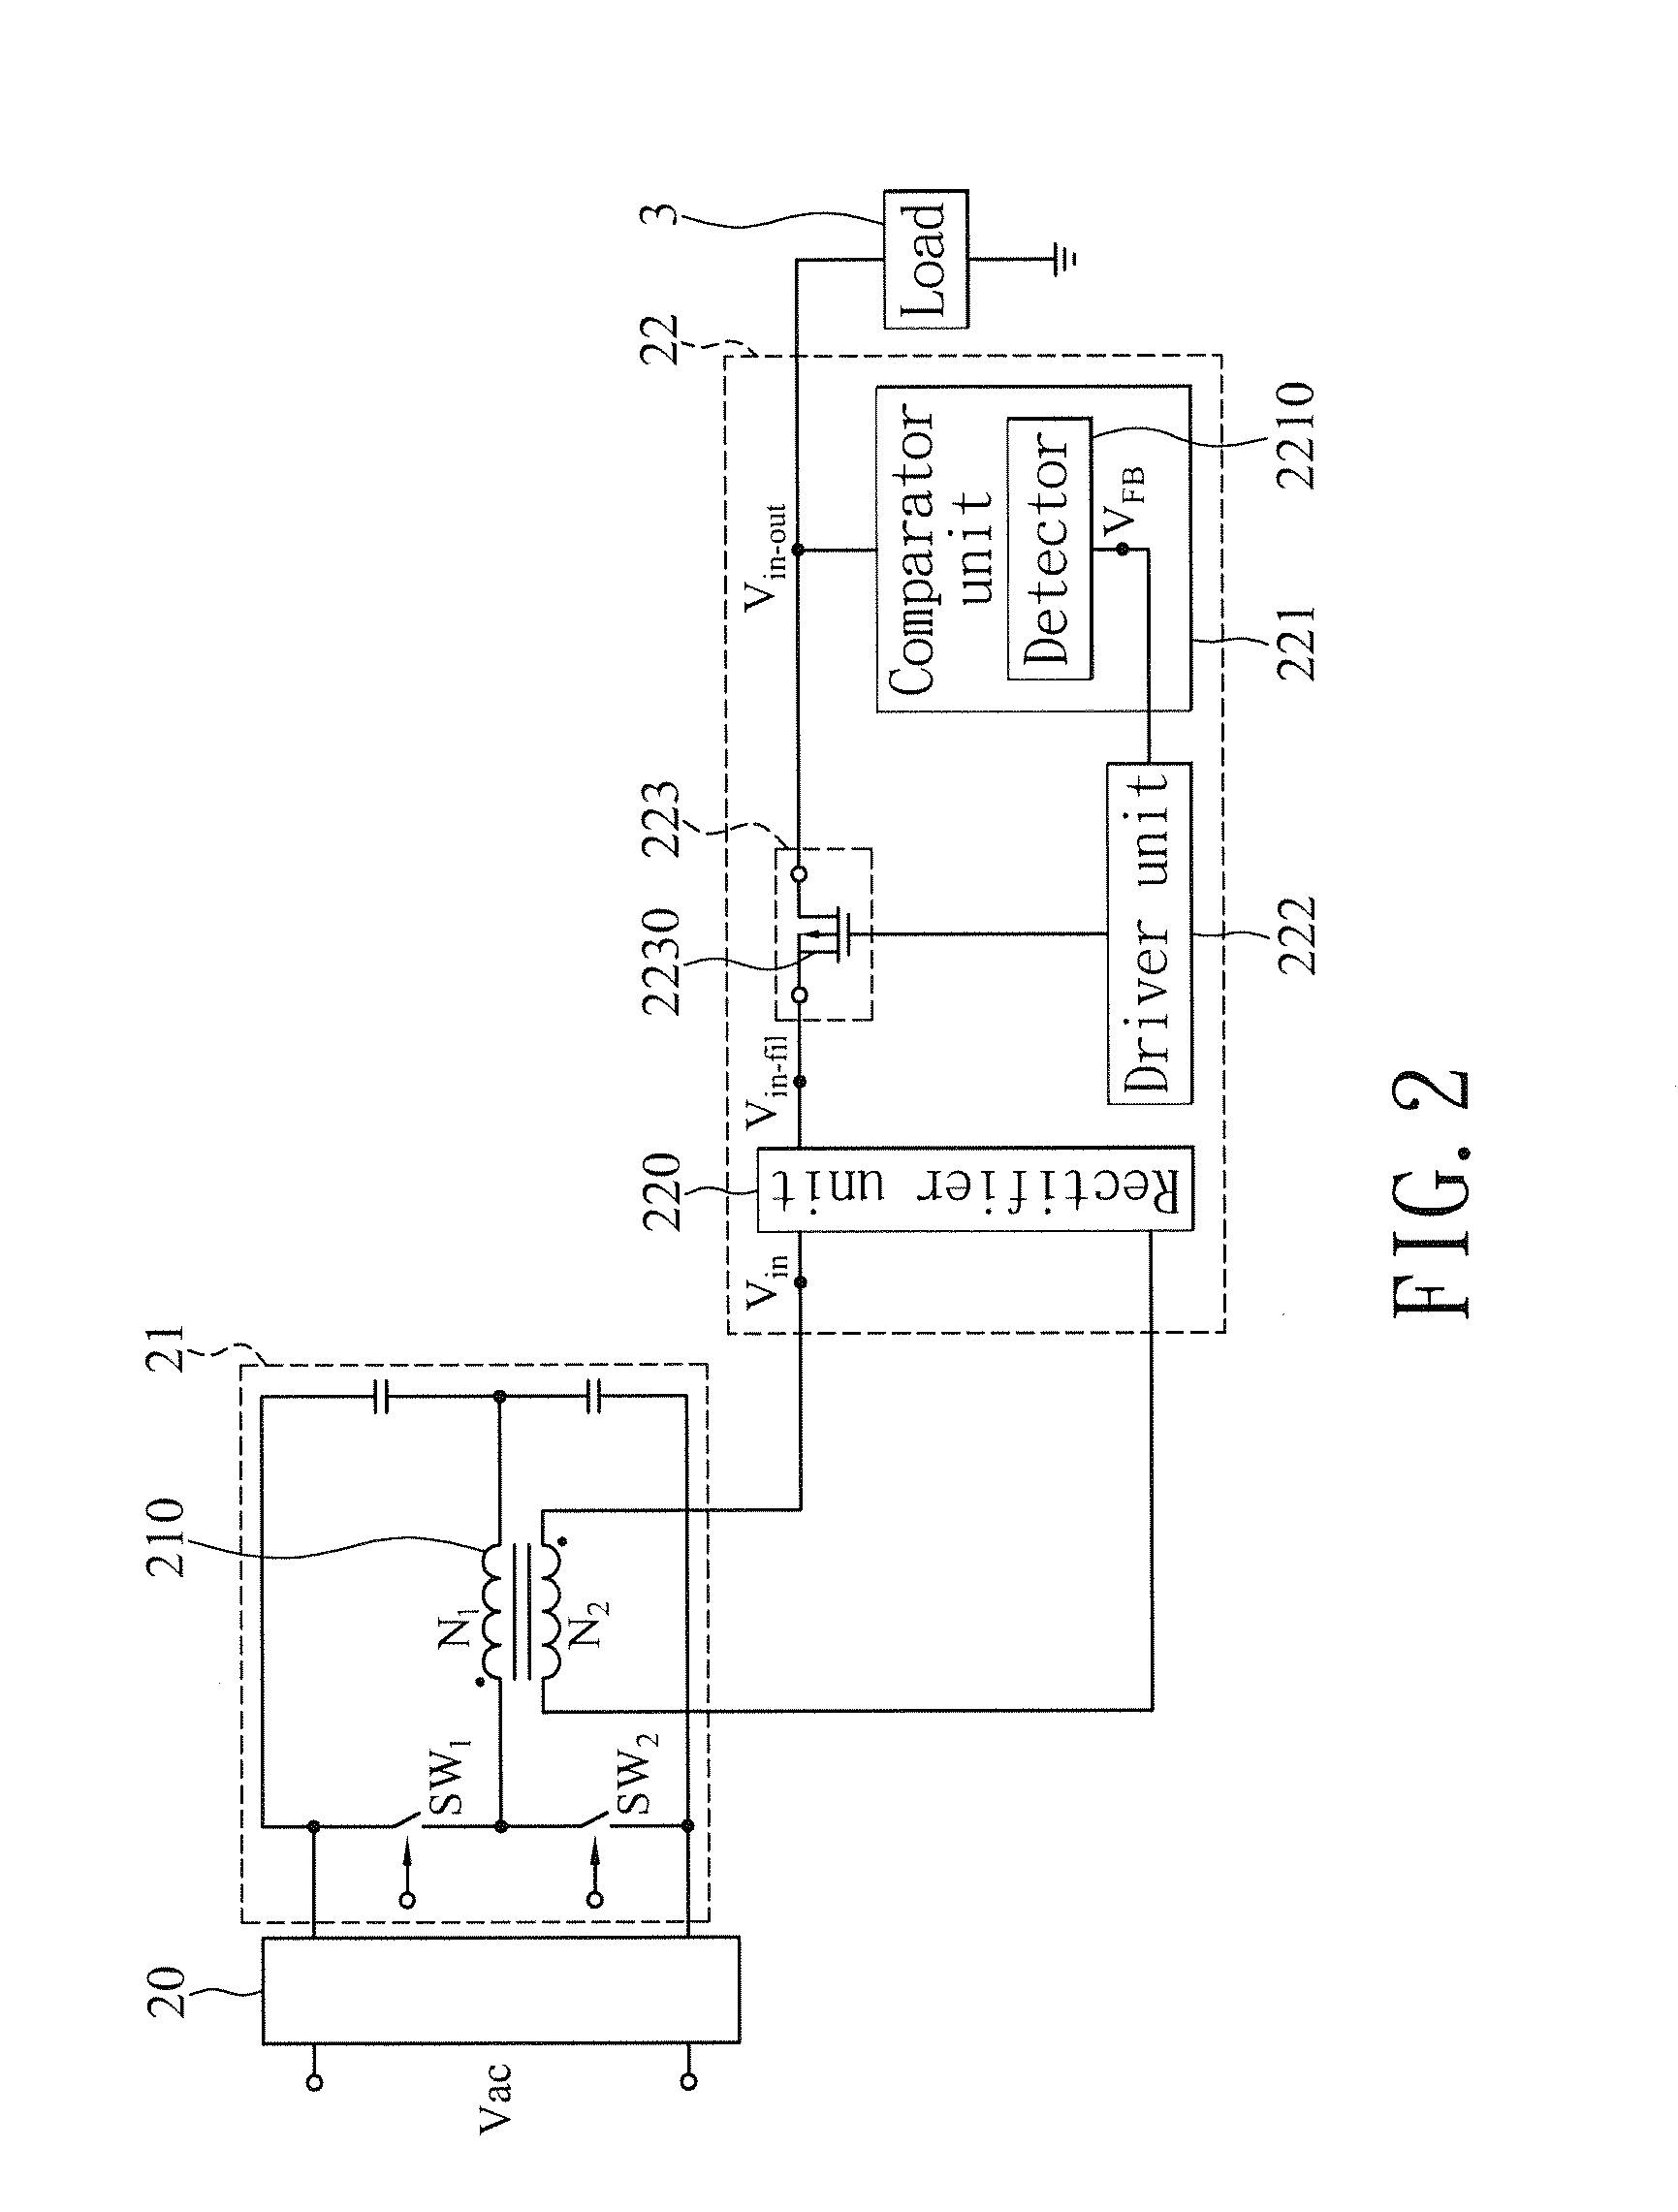 Self-excited power conversion circuit for secondary side control output power